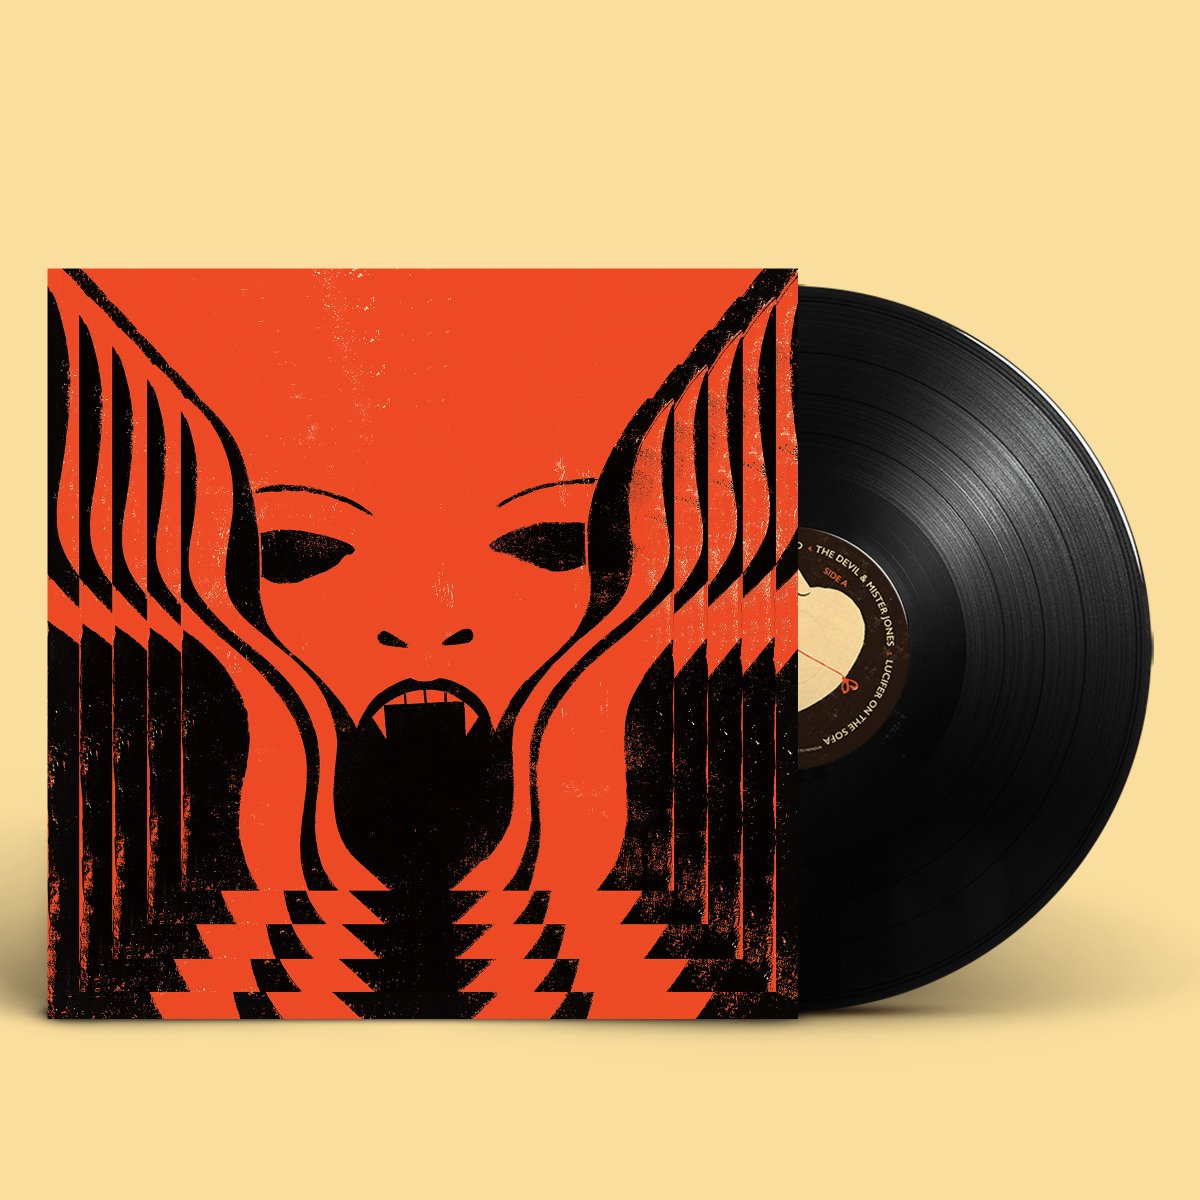 Lucifer On The Moon is the new album companion to Lucifer On The Sofa hand-crafted by dub icon Adrian Sherwood. It’s a reimagining, a rebuilding, a Part II that takes it into a whole new stratosphere. Get it now, both digitally and physically: spoon.ffm.to/lotm